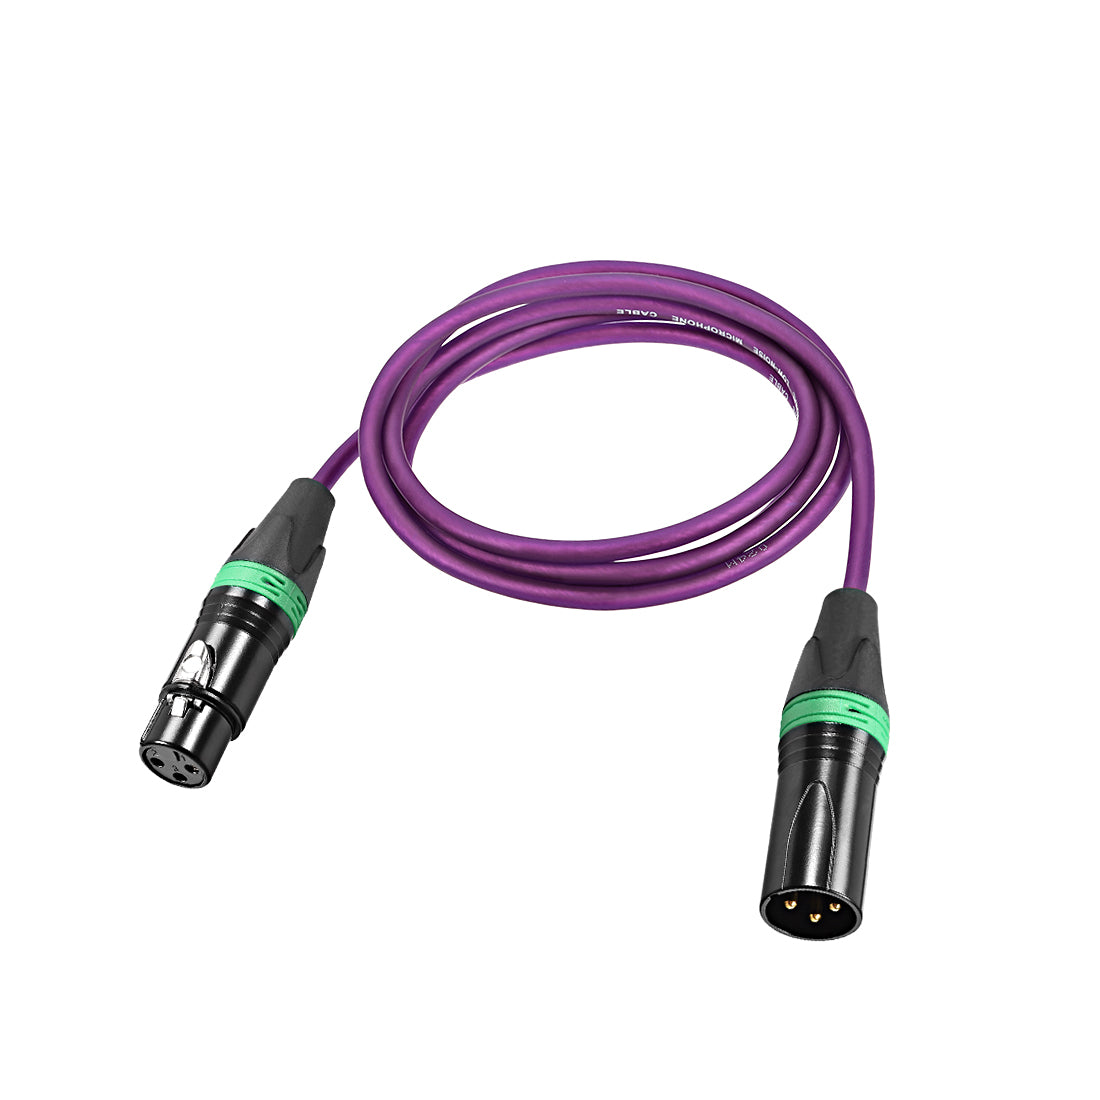 uxcell Uxcell XLR Male to XLR Female Cable Line for Microphone Video Camera Sound Card Mixer Green Black XLR Purple Line 2M  6.56ft